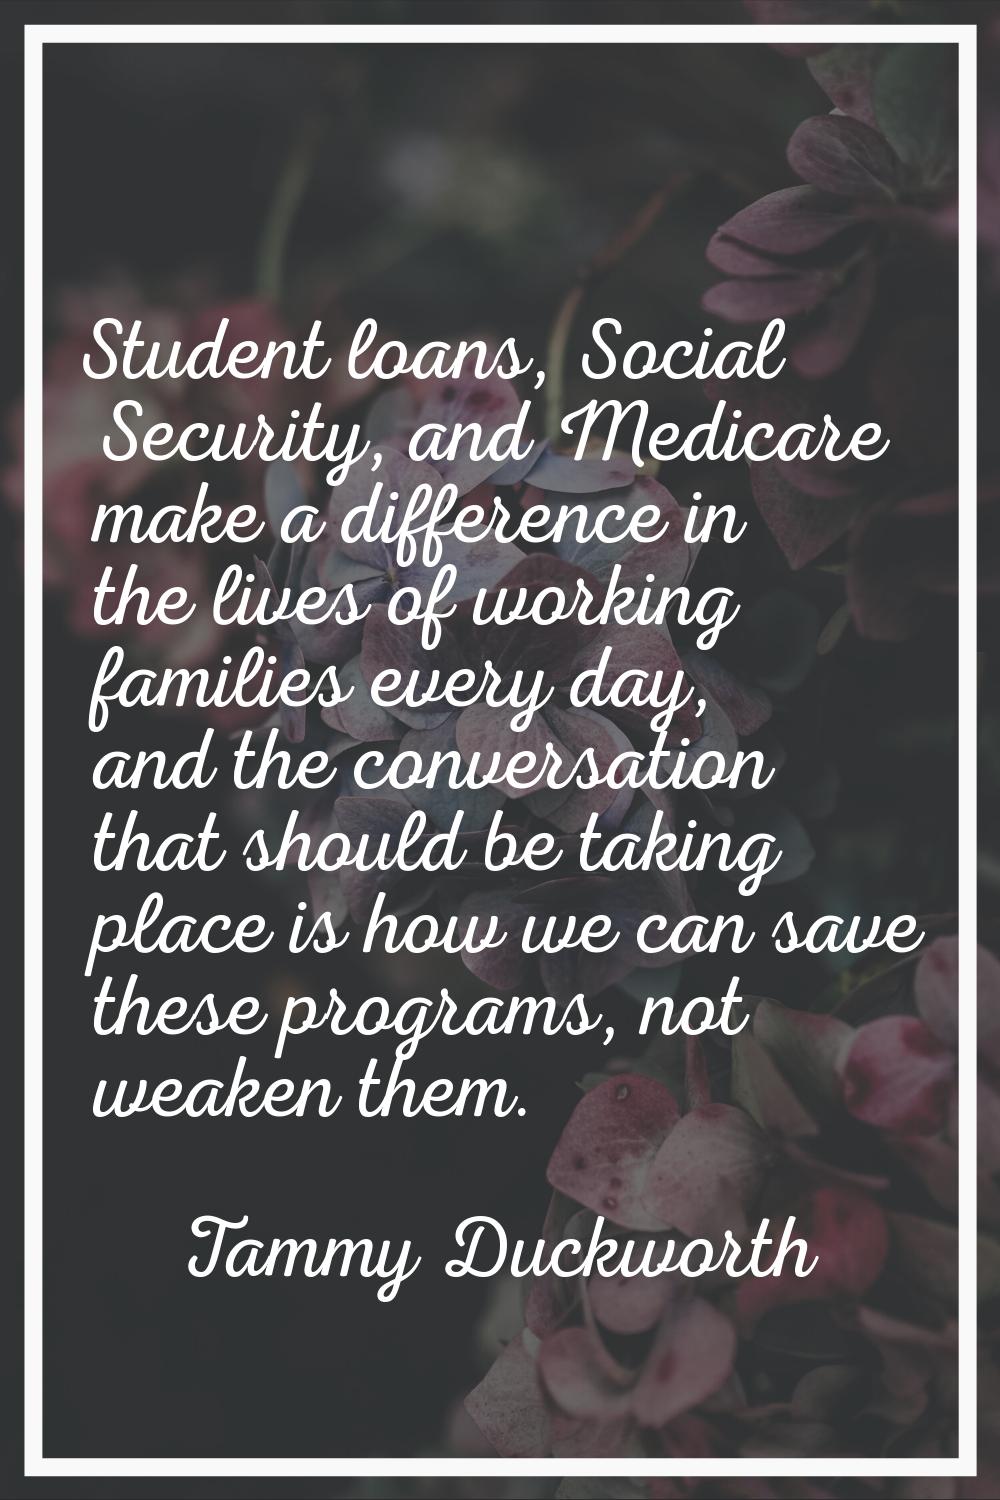 Student loans, Social Security, and Medicare make a difference in the lives of working families eve